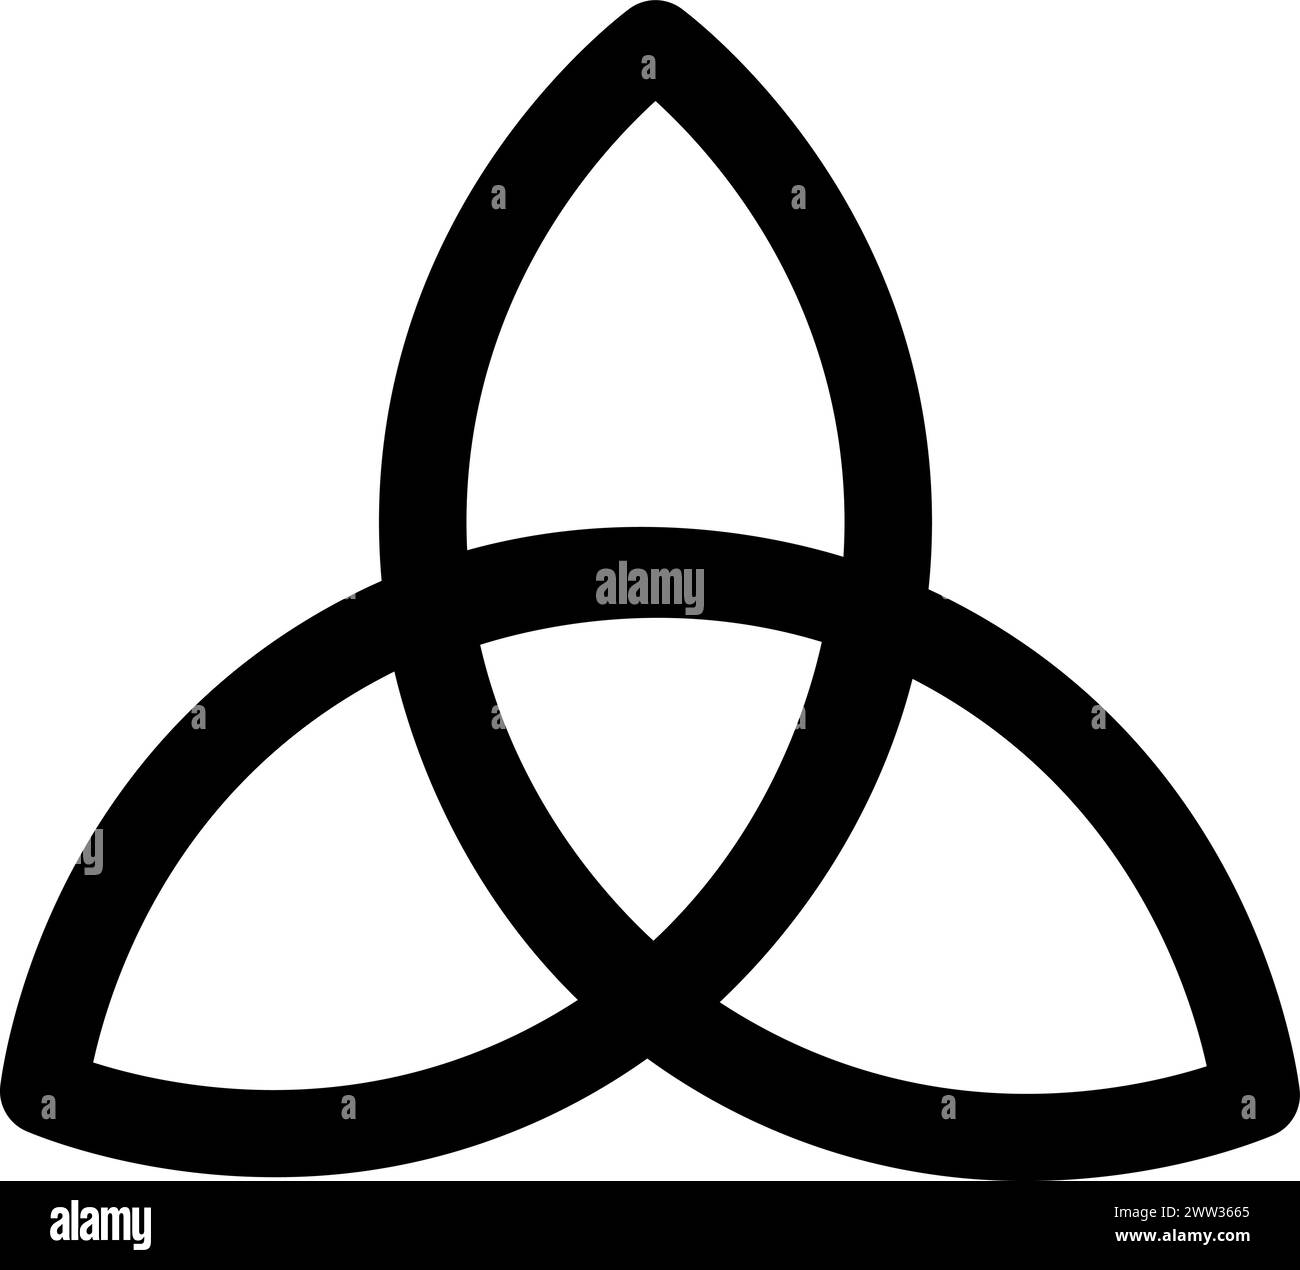 Celtic trinity mystical religious symbol. Spiritual triangle infinite sign of traditional culture of worship and veneration. Simple black and white ve Stock Vector